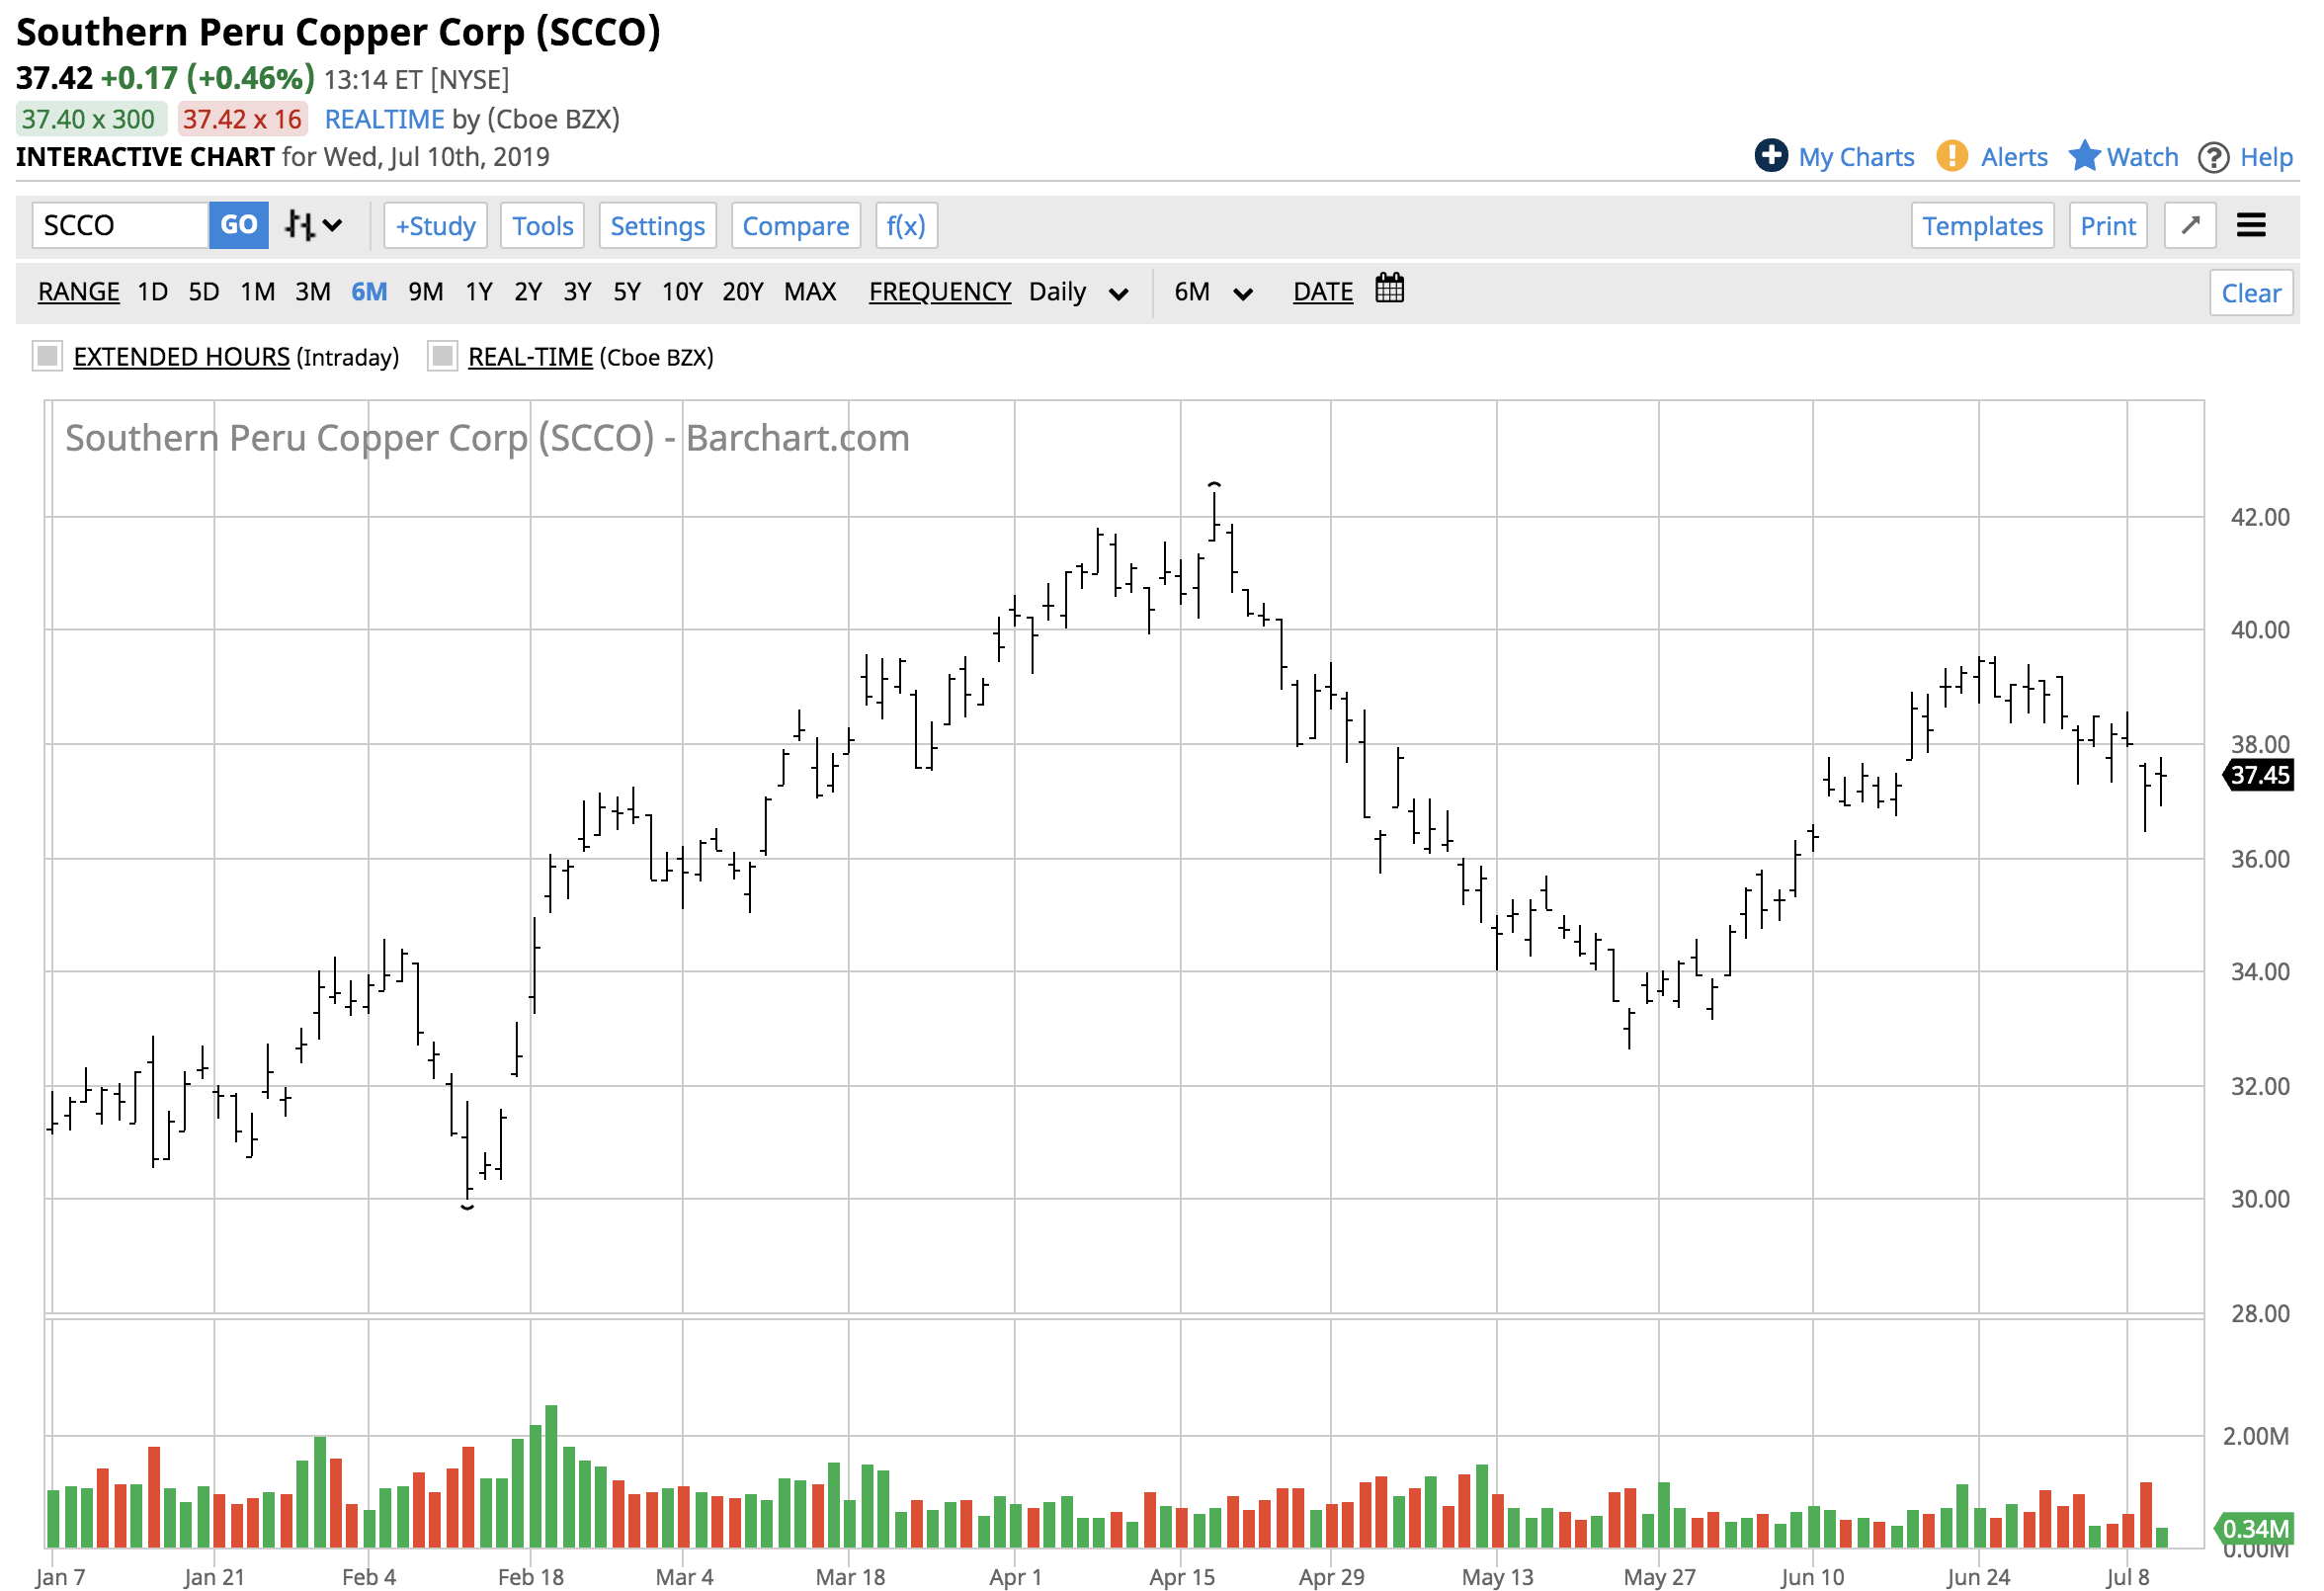 Daily Commodity Futures Copper Price Chart